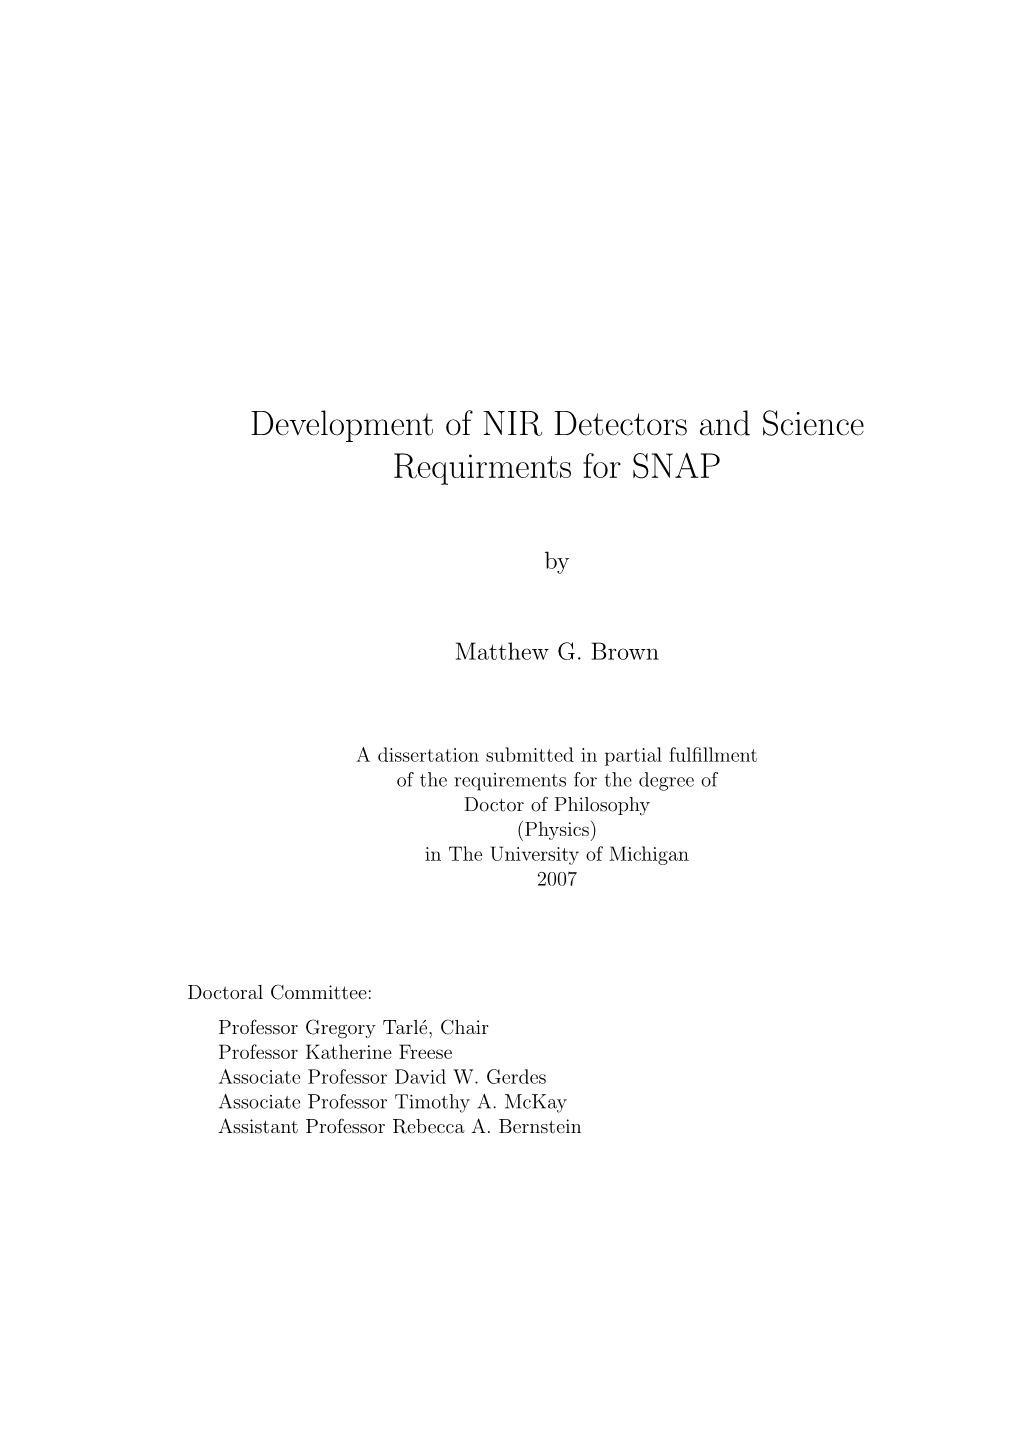 Development of NIR Detectors and Science Requirments for SNAP